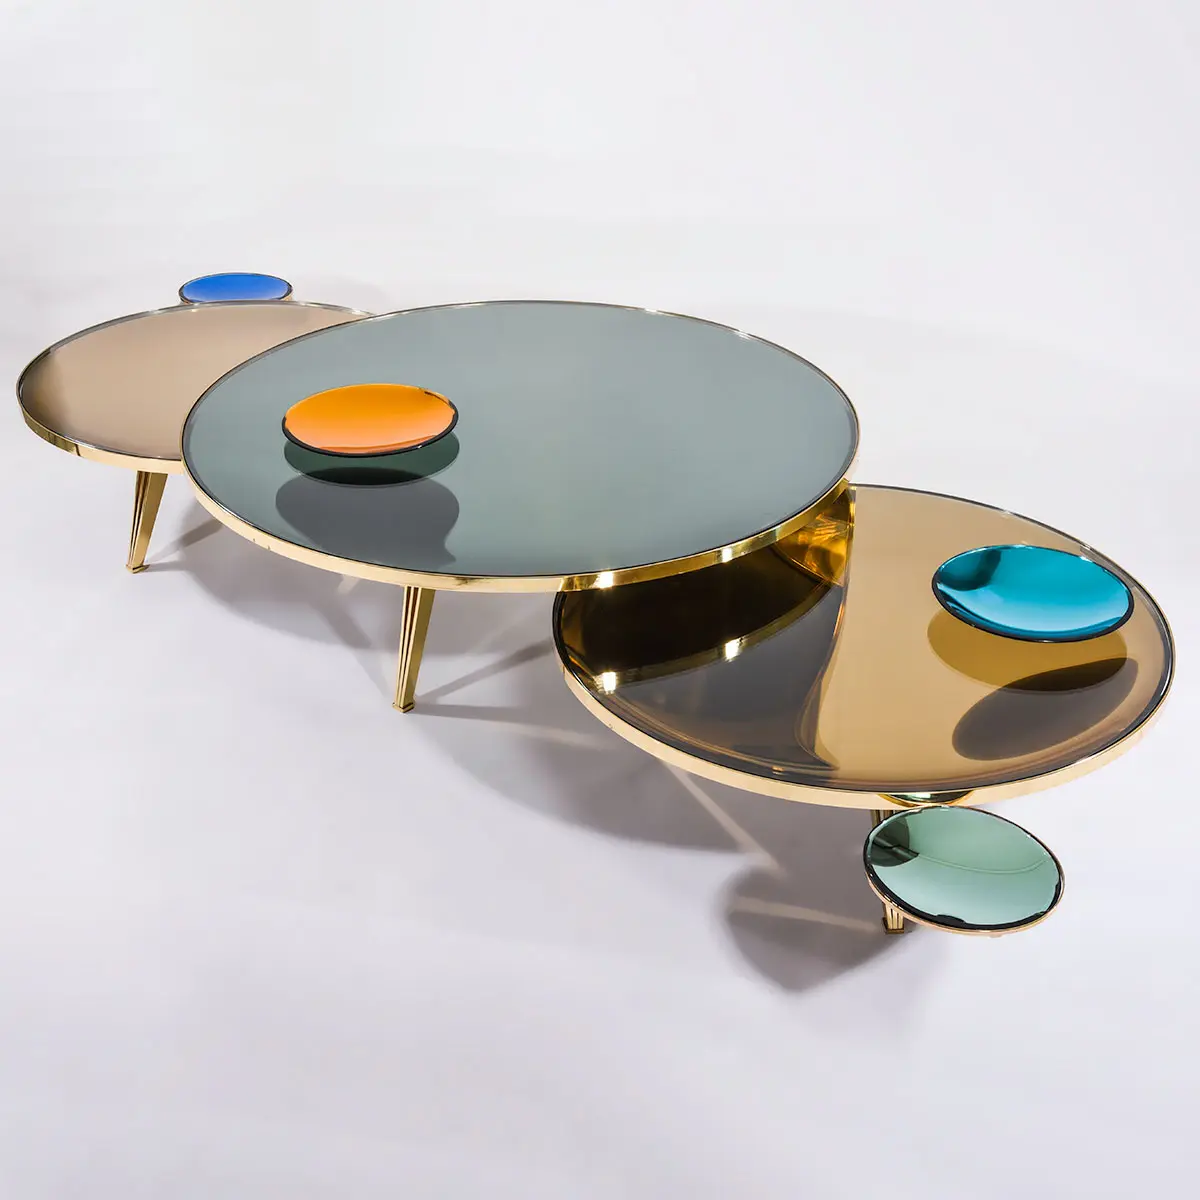 riflesso coffee table by Gaspare asaro